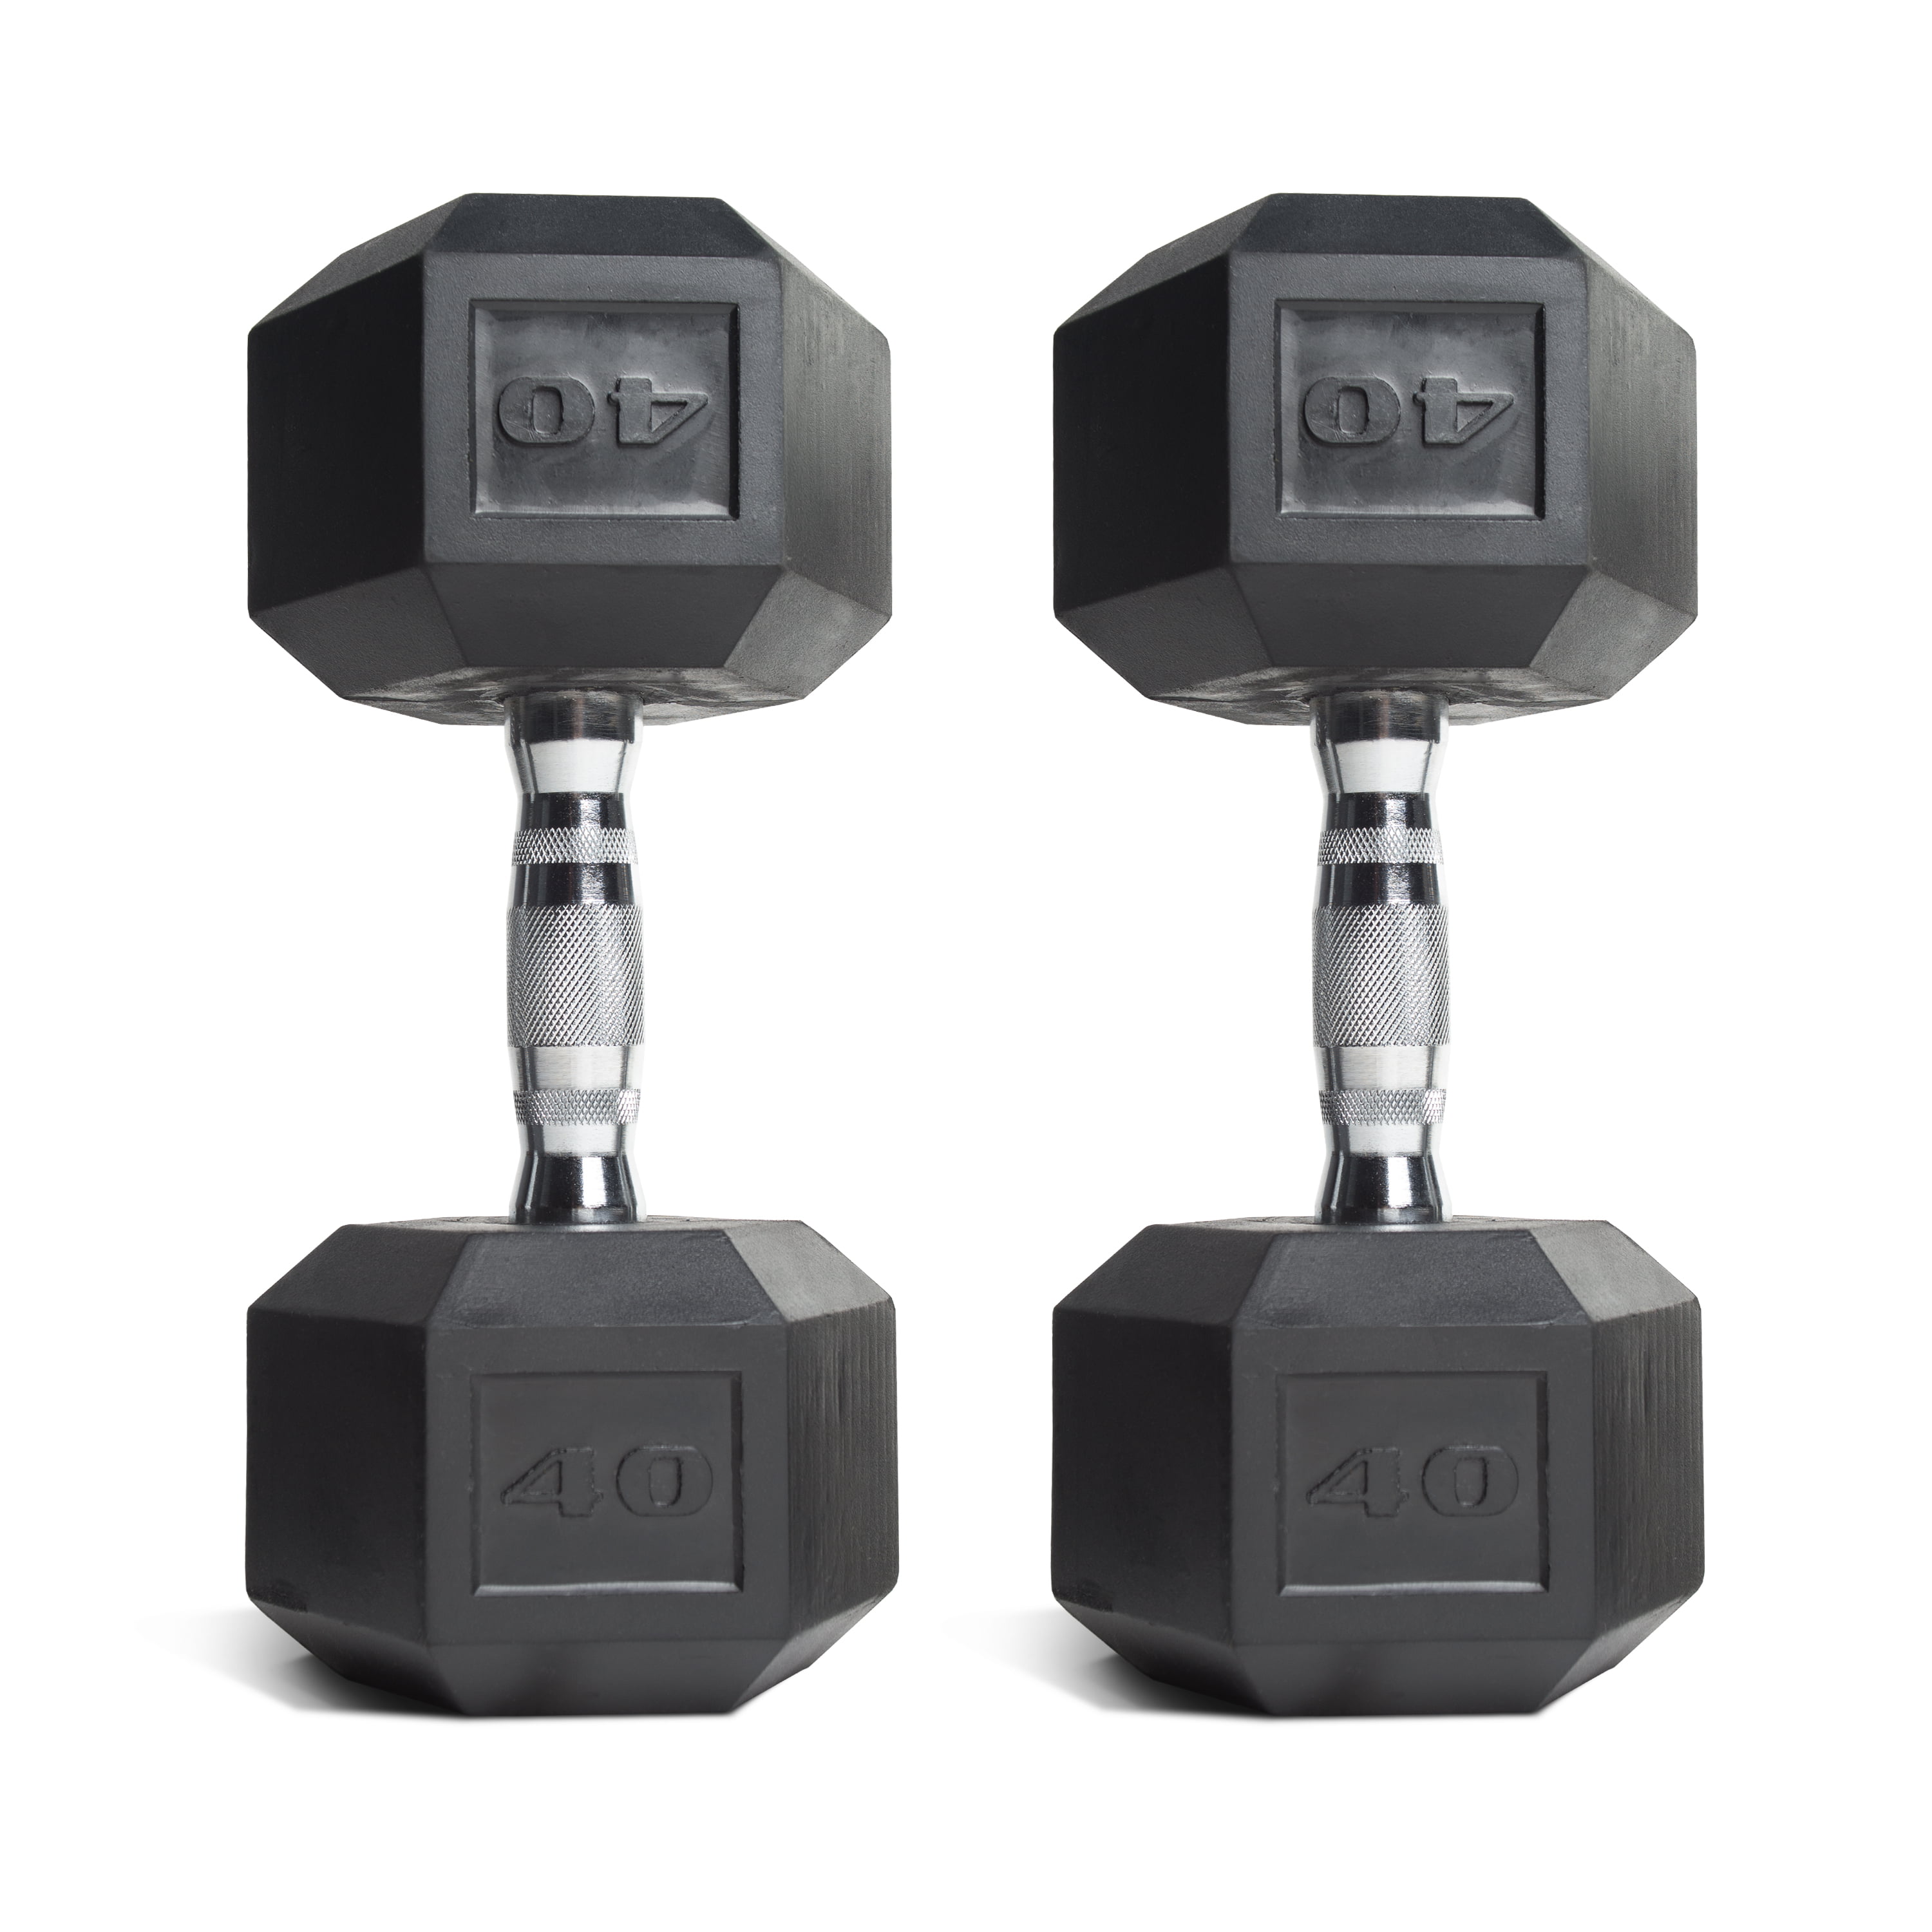 20Lb Weider RubberHex Dumbbells Compare CAP Brand New Set Of 2 40 Lbs Total 